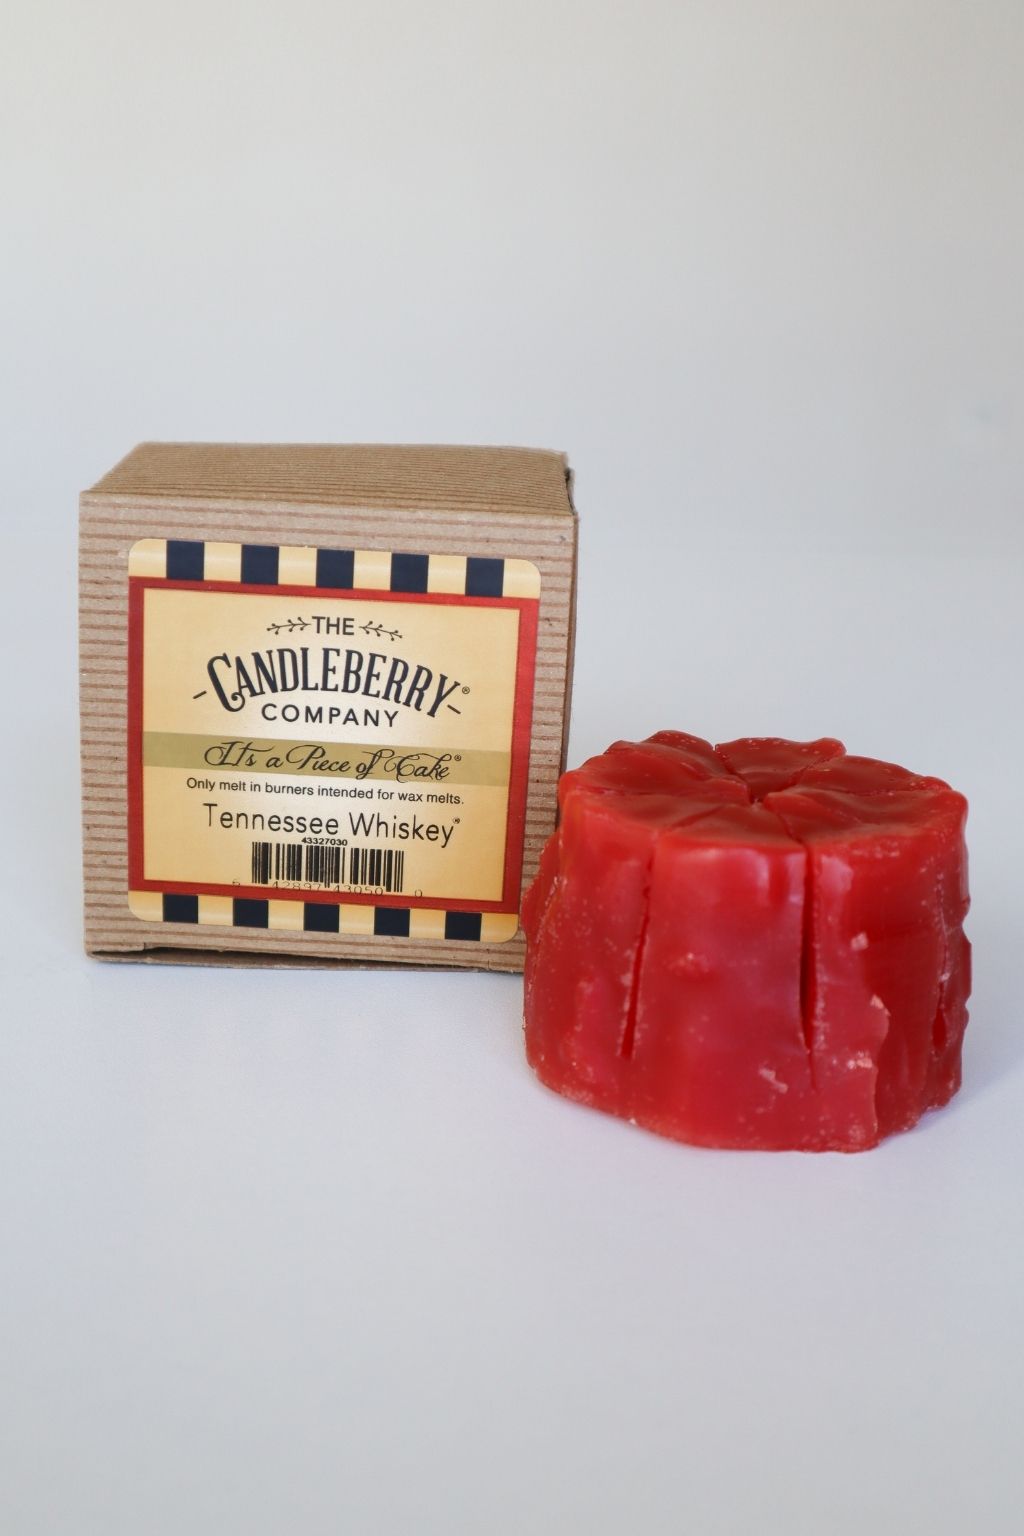 Tennessee Whiskey Candleberry Wax Melts